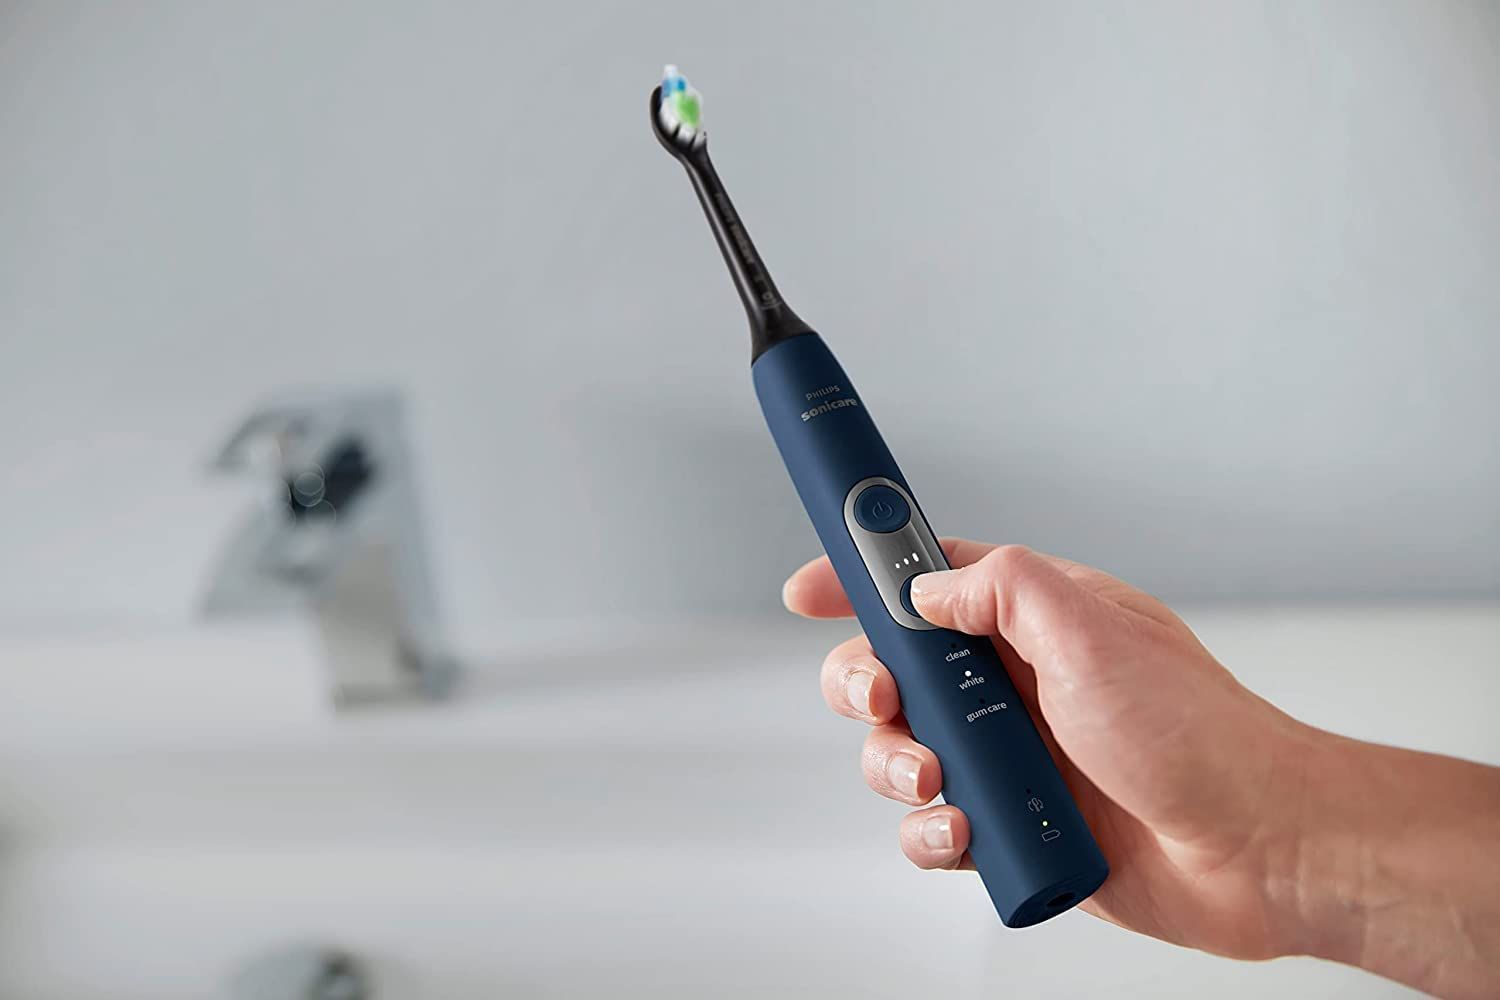 Sonicare ProtectiveClean Electric Toothbrush